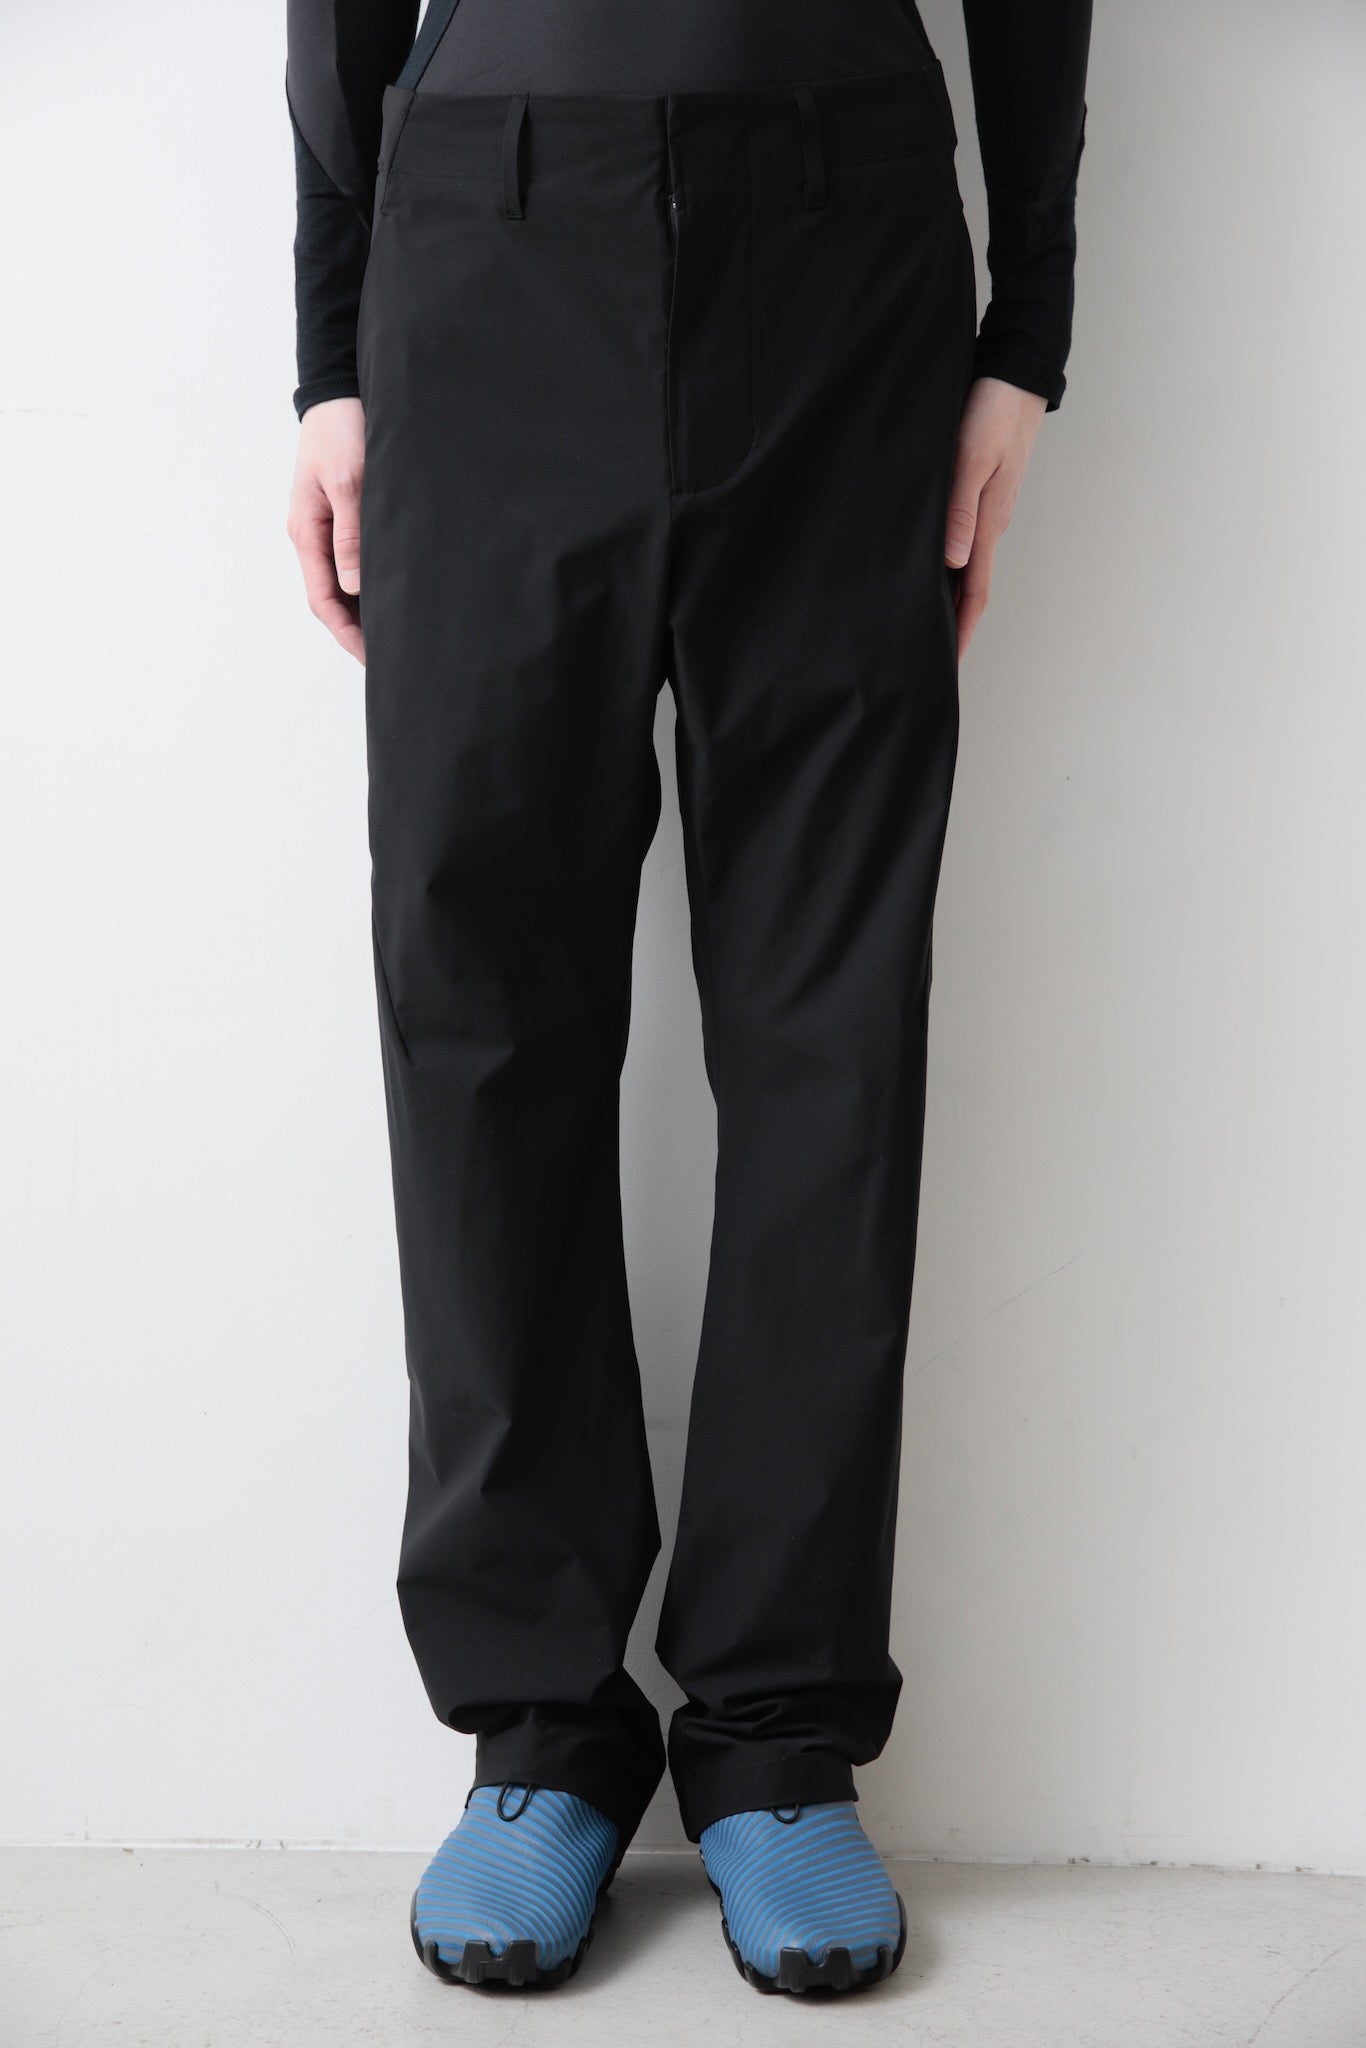 PAF 6.0 TECHNICAL PANTS RIGHT